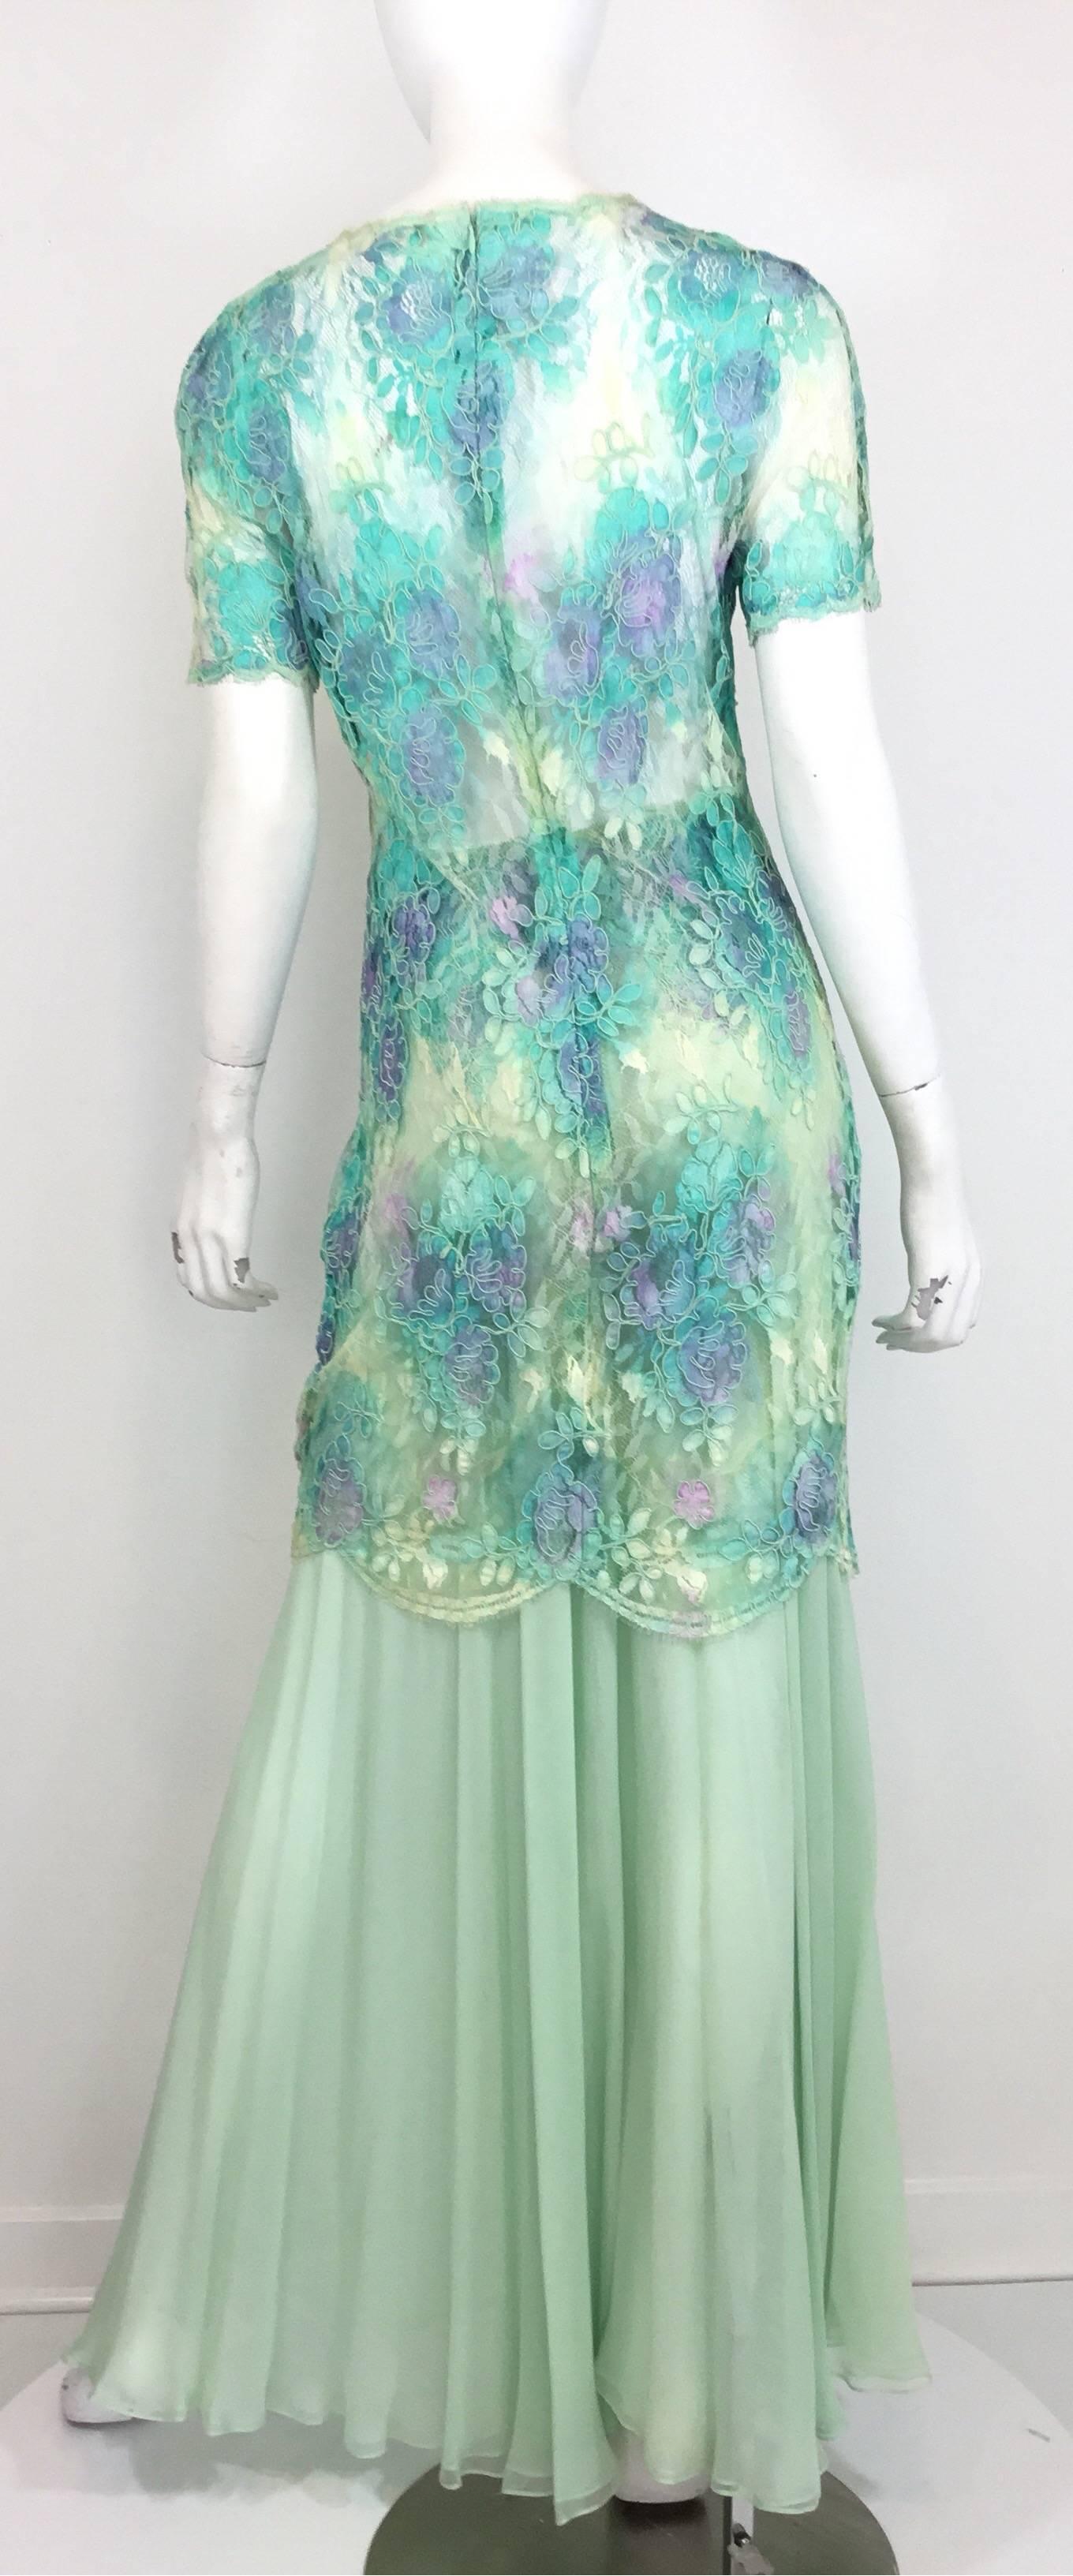 Beautiful multicolored lace dress cover has a back zipper fastening. Sheer pants feature a lace trim along the waistline and has a back zipper closure. 

Dress cover: bust 34'', waist 30'', hips 36'', length 36''
Pants: waist 26'', hips 34'', length